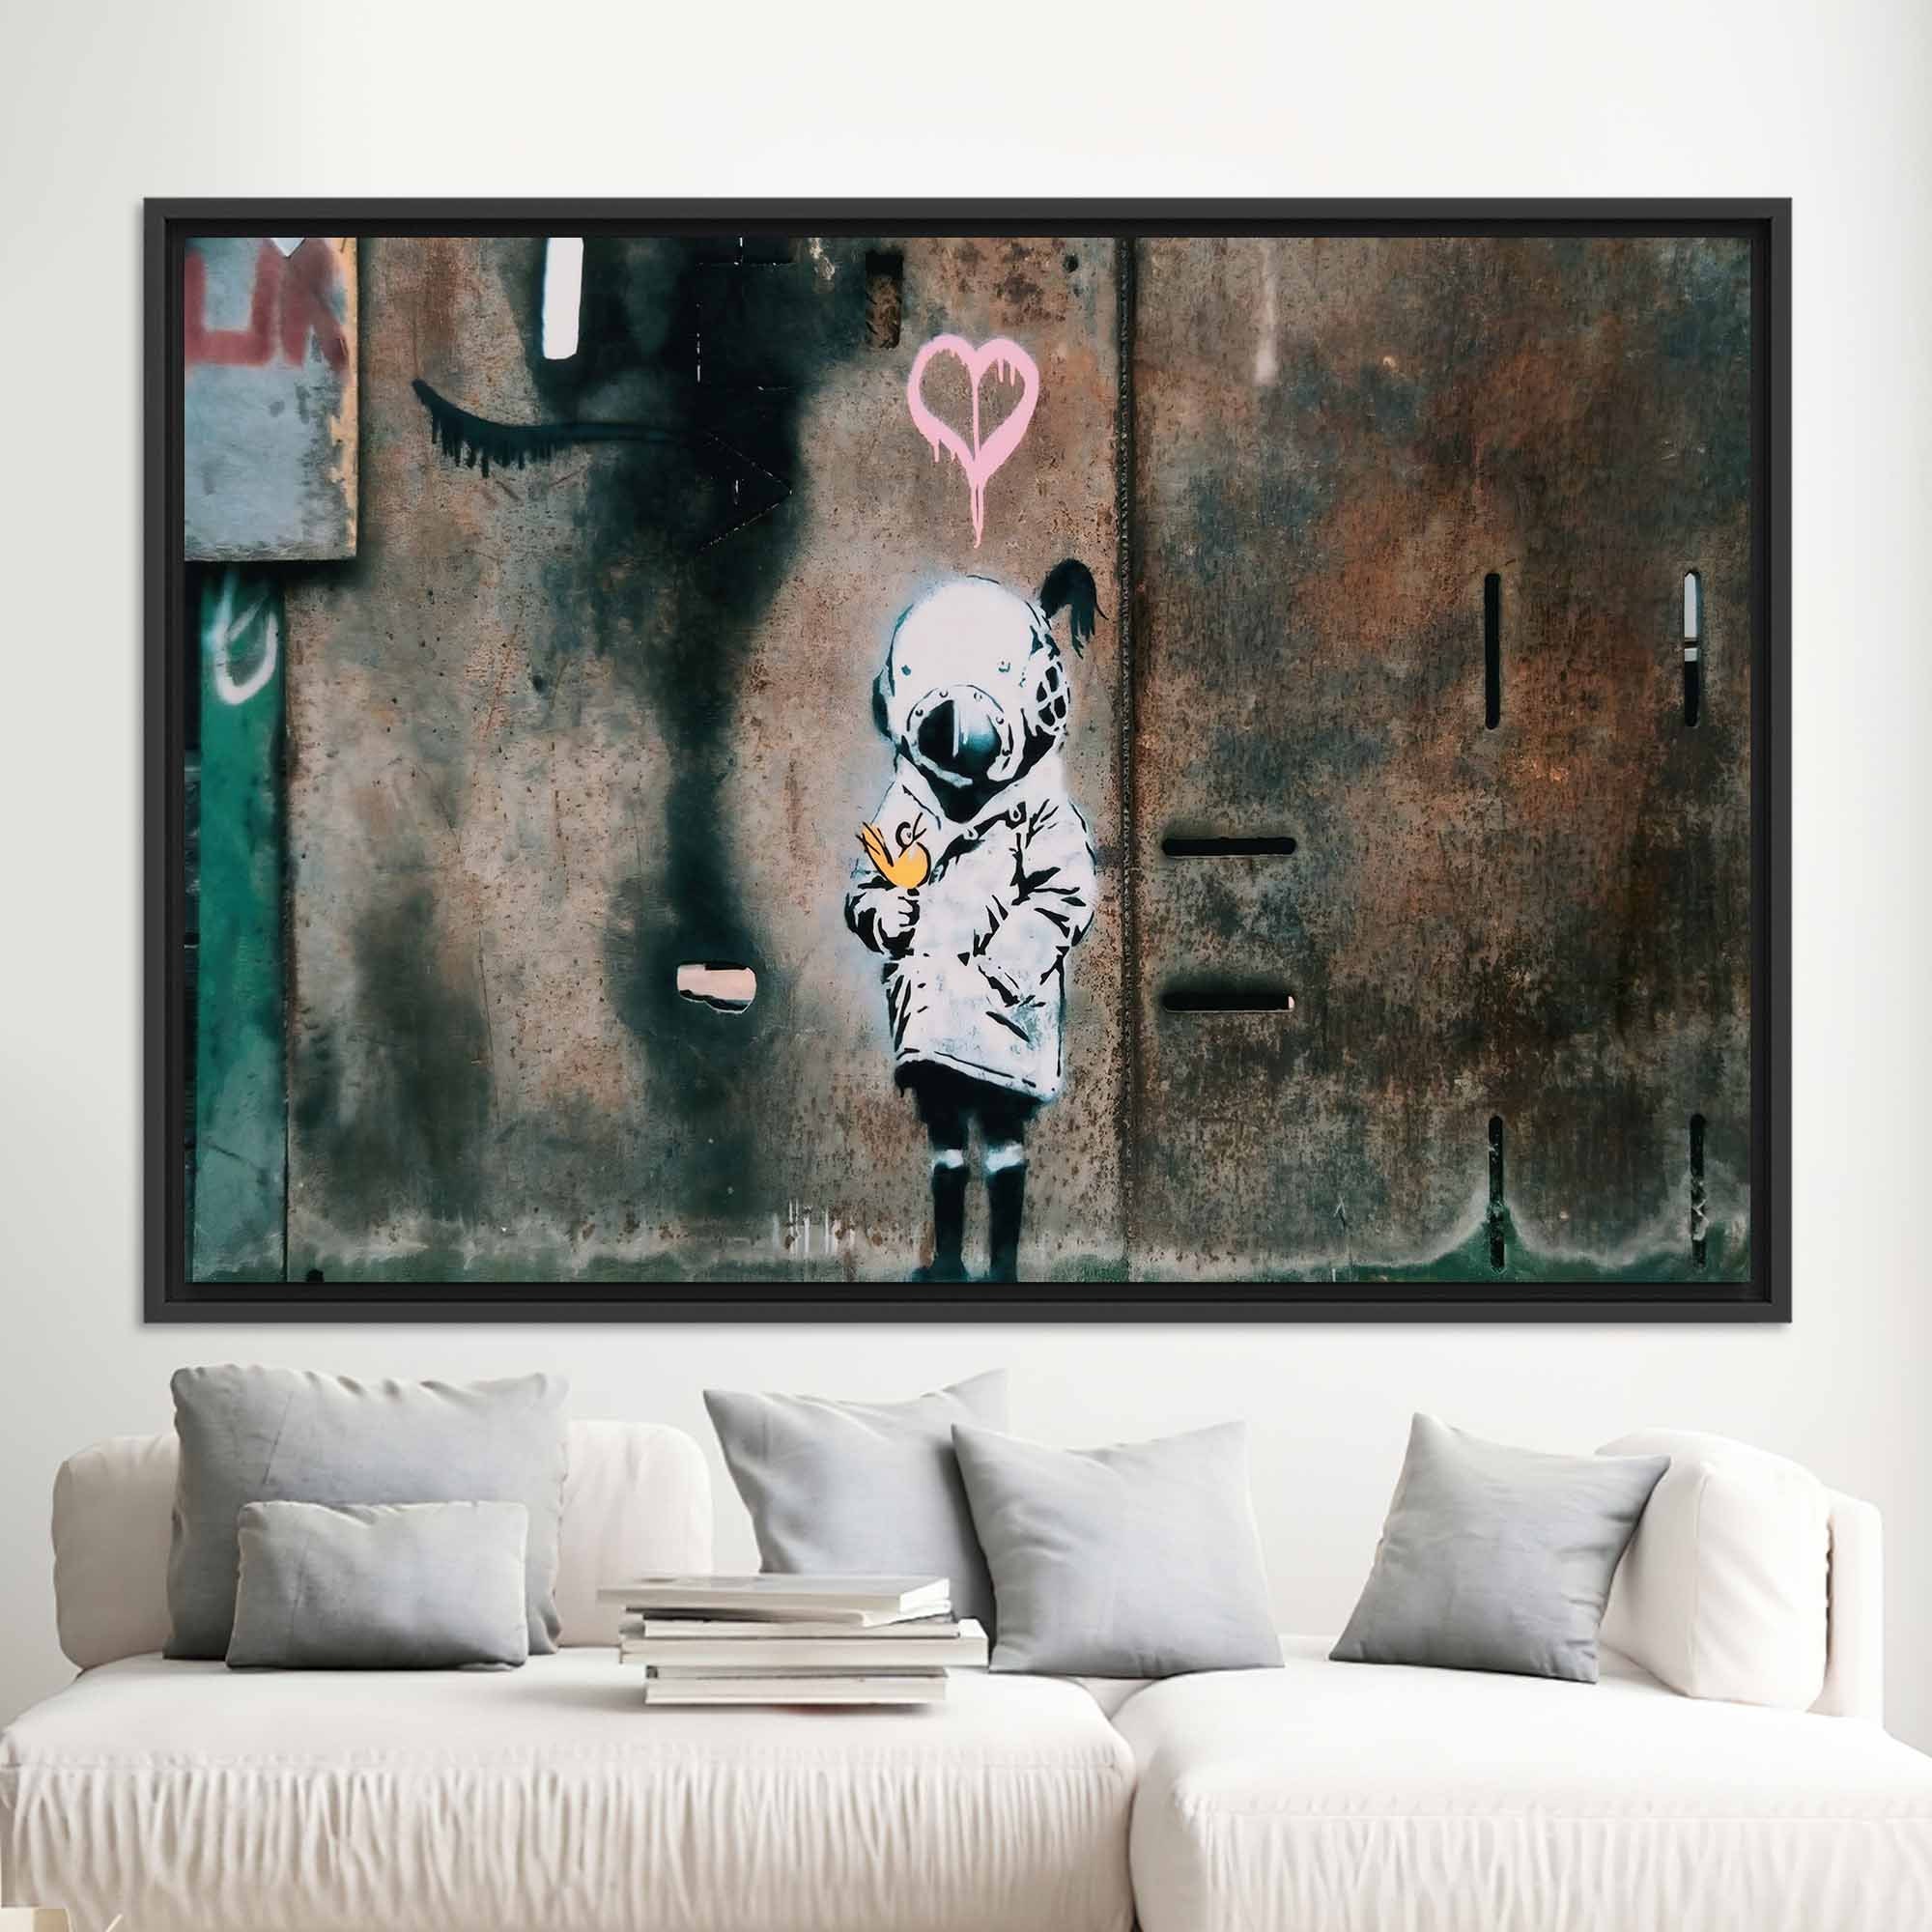  Banksy Canvas Wall Art Banksy Poster Large Size Picture Prints  for Living Room Bedroom Kitchen and Office Wall Decor Frameless (65x130 cm)  26×52 inch: Posters & Prints